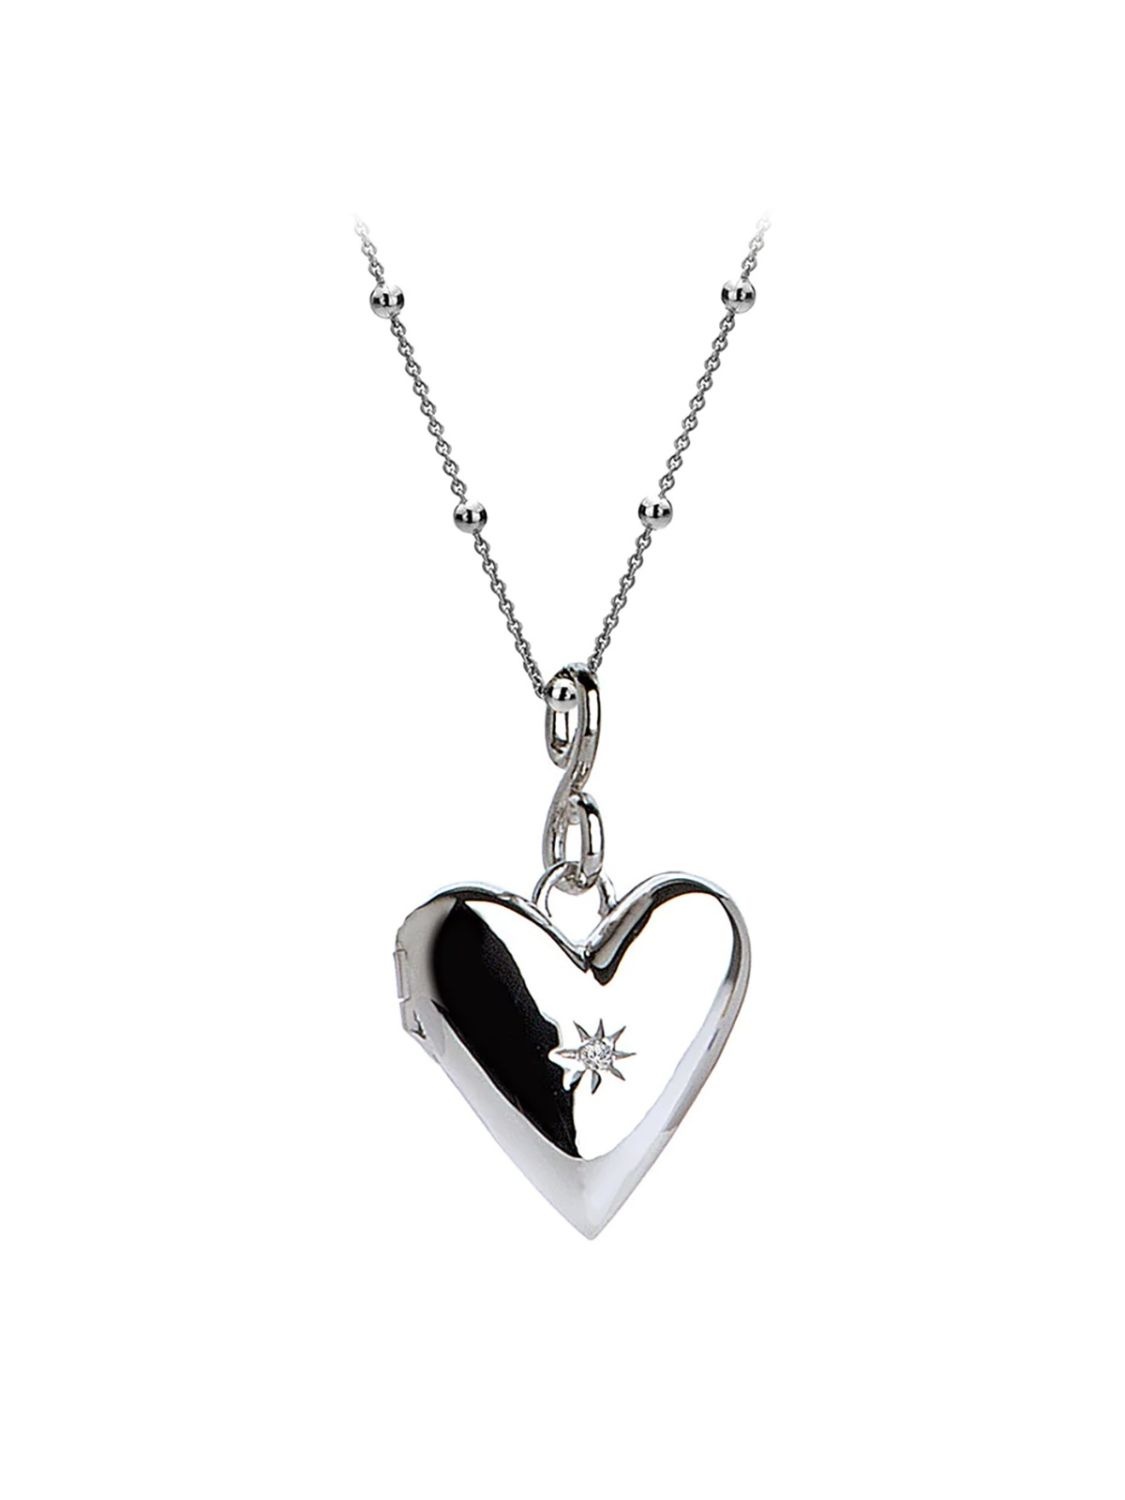 Collection Sterling Silver Polished Heart Locket Pendant Necklace